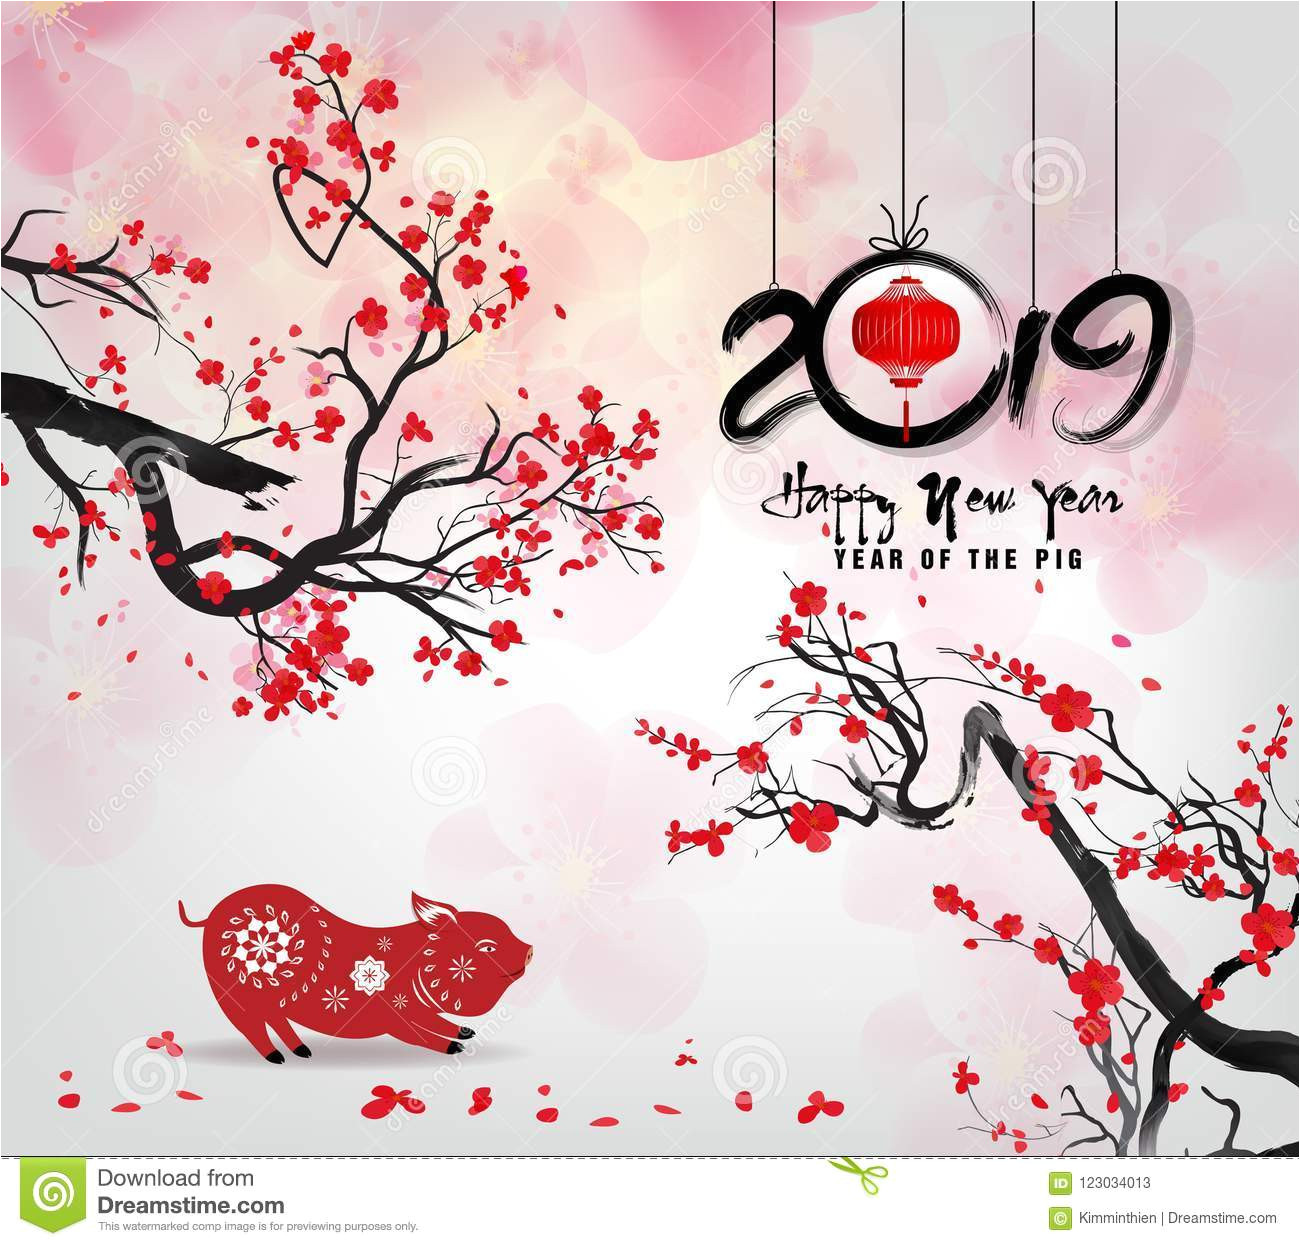 creative chinese new year invitation cards year pig chinese characters mean happy new year happy new year greeting card 123034013 jpg